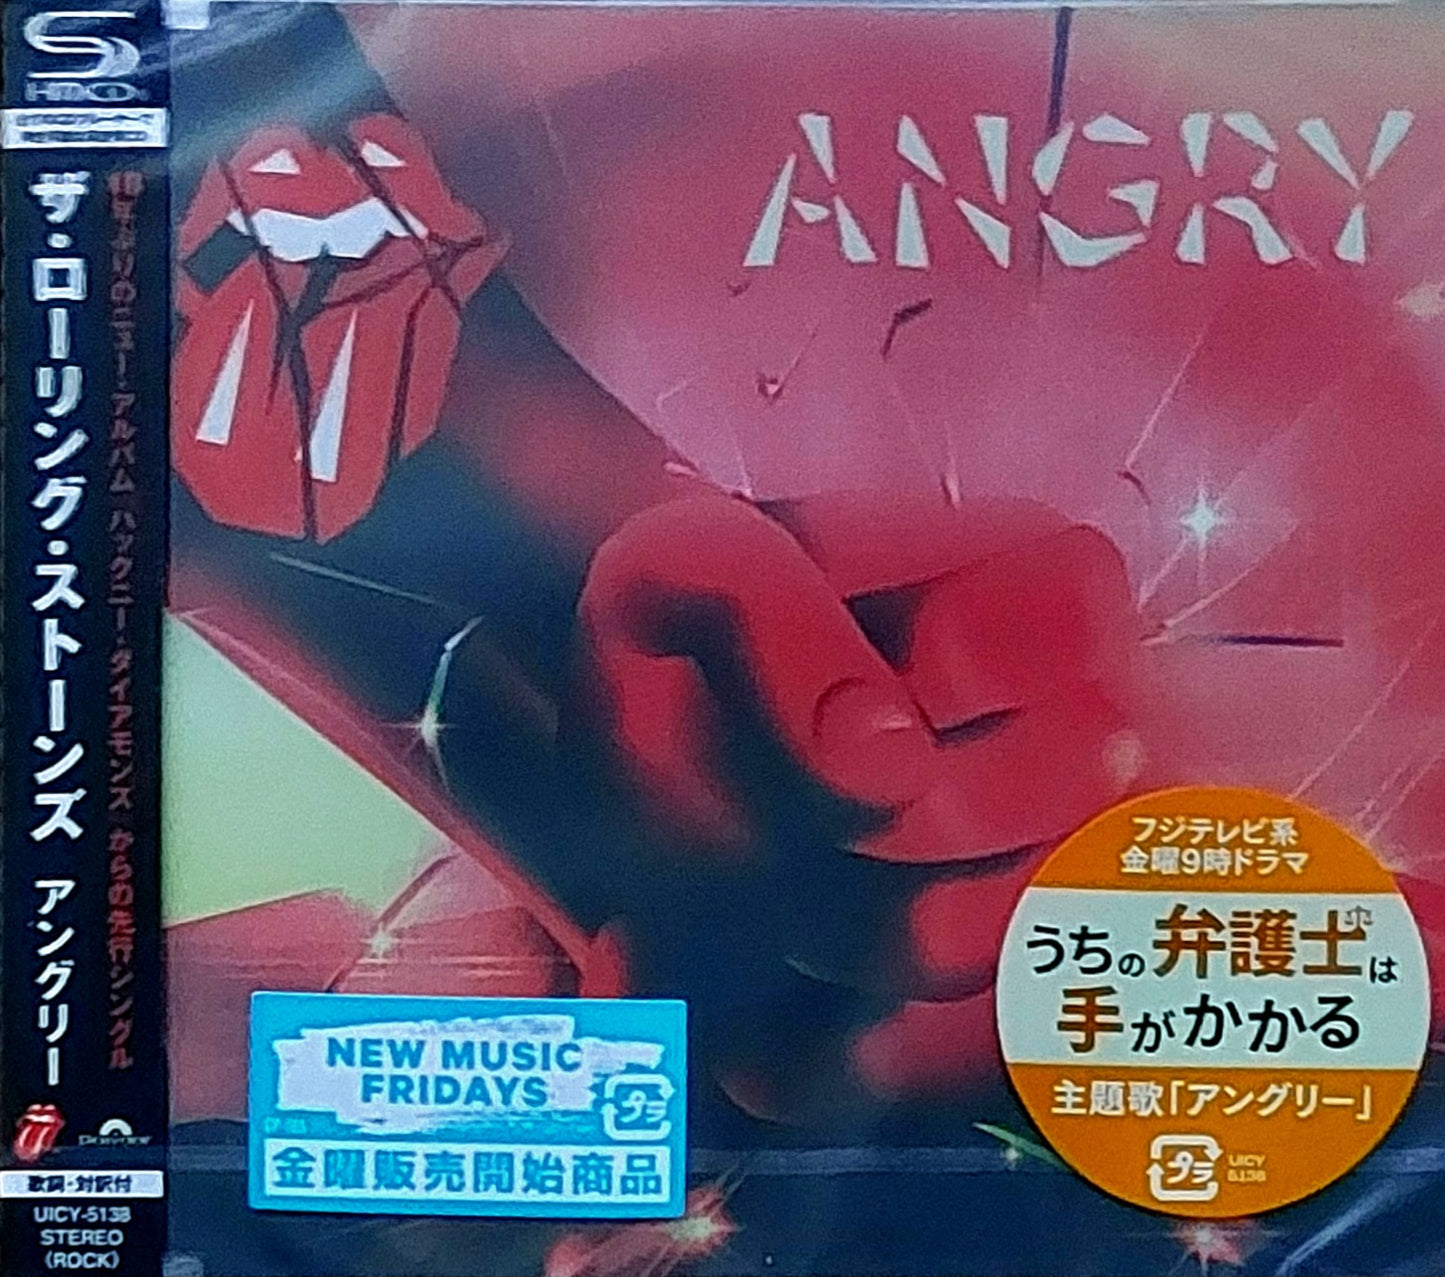 Angry_Rolling_Stones_Japanese_SHM-CD_CD_Single_Front